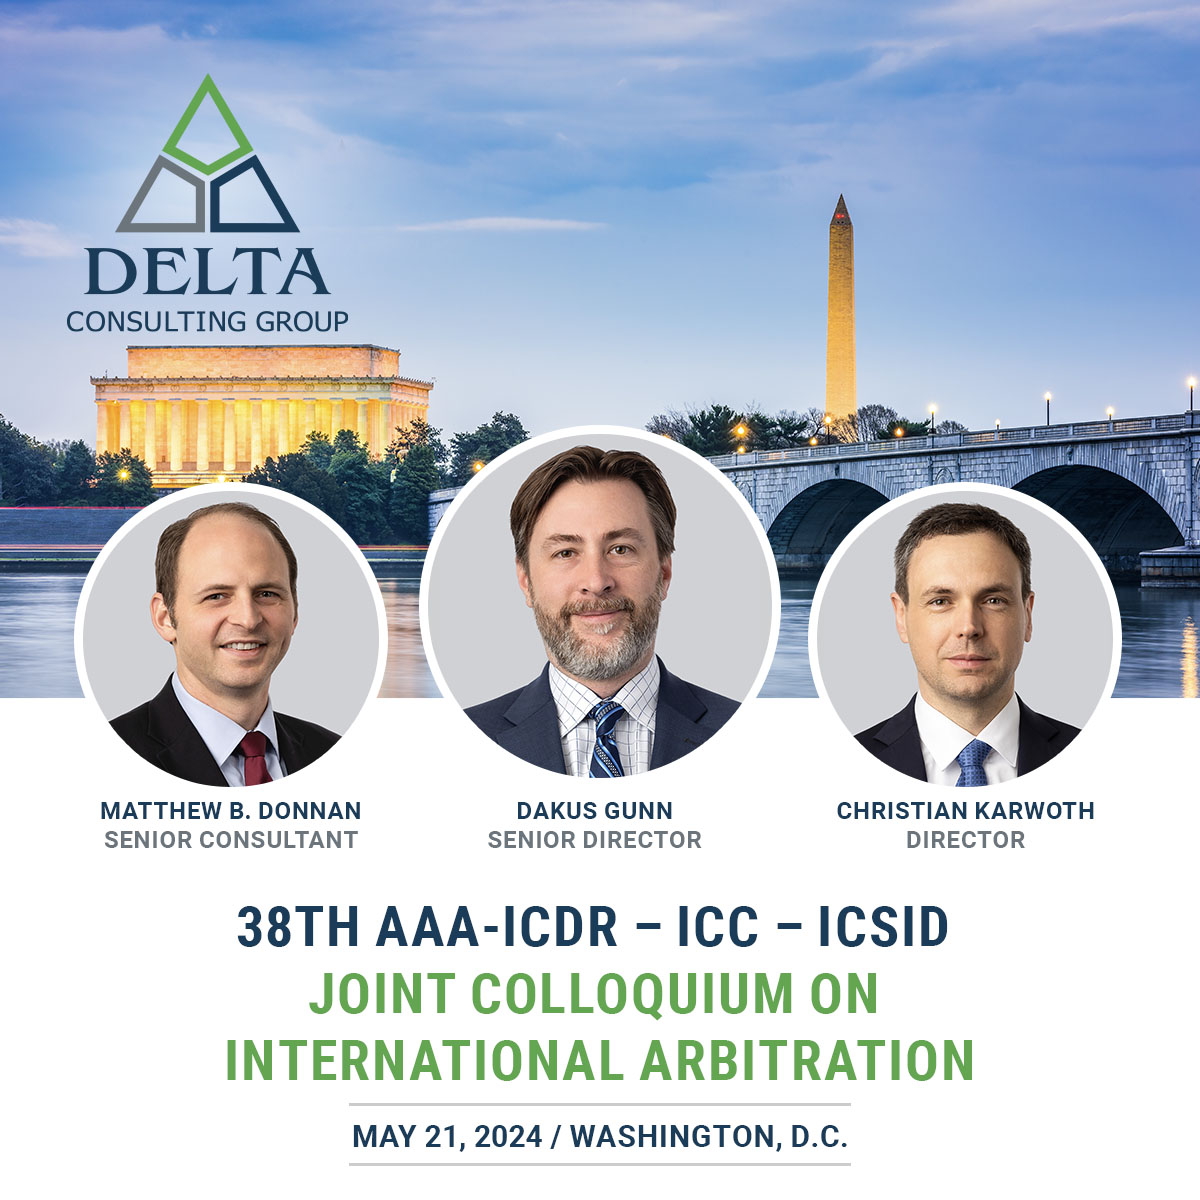 Delta Consulting Group - International Arbitration